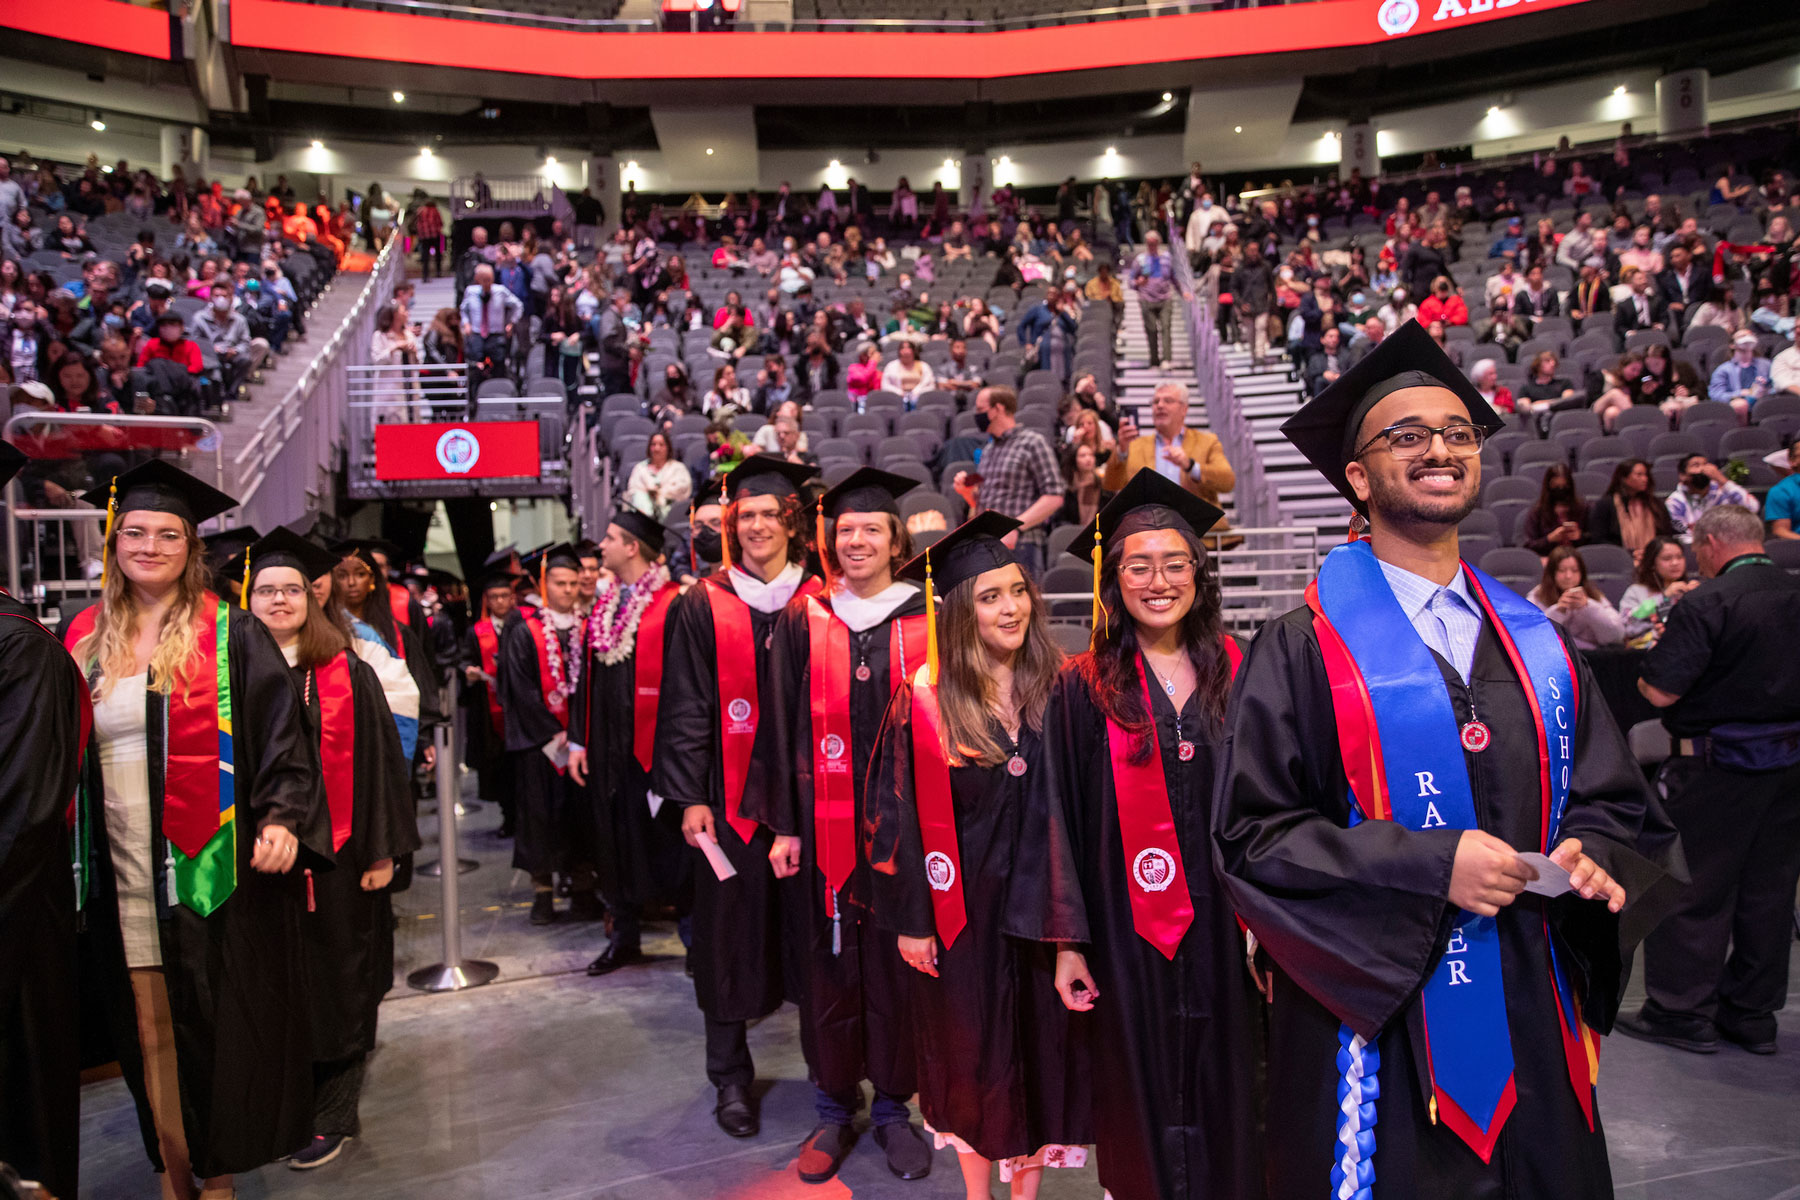 Seattle U grads walk in procession into the arena as audience members fill the seats.